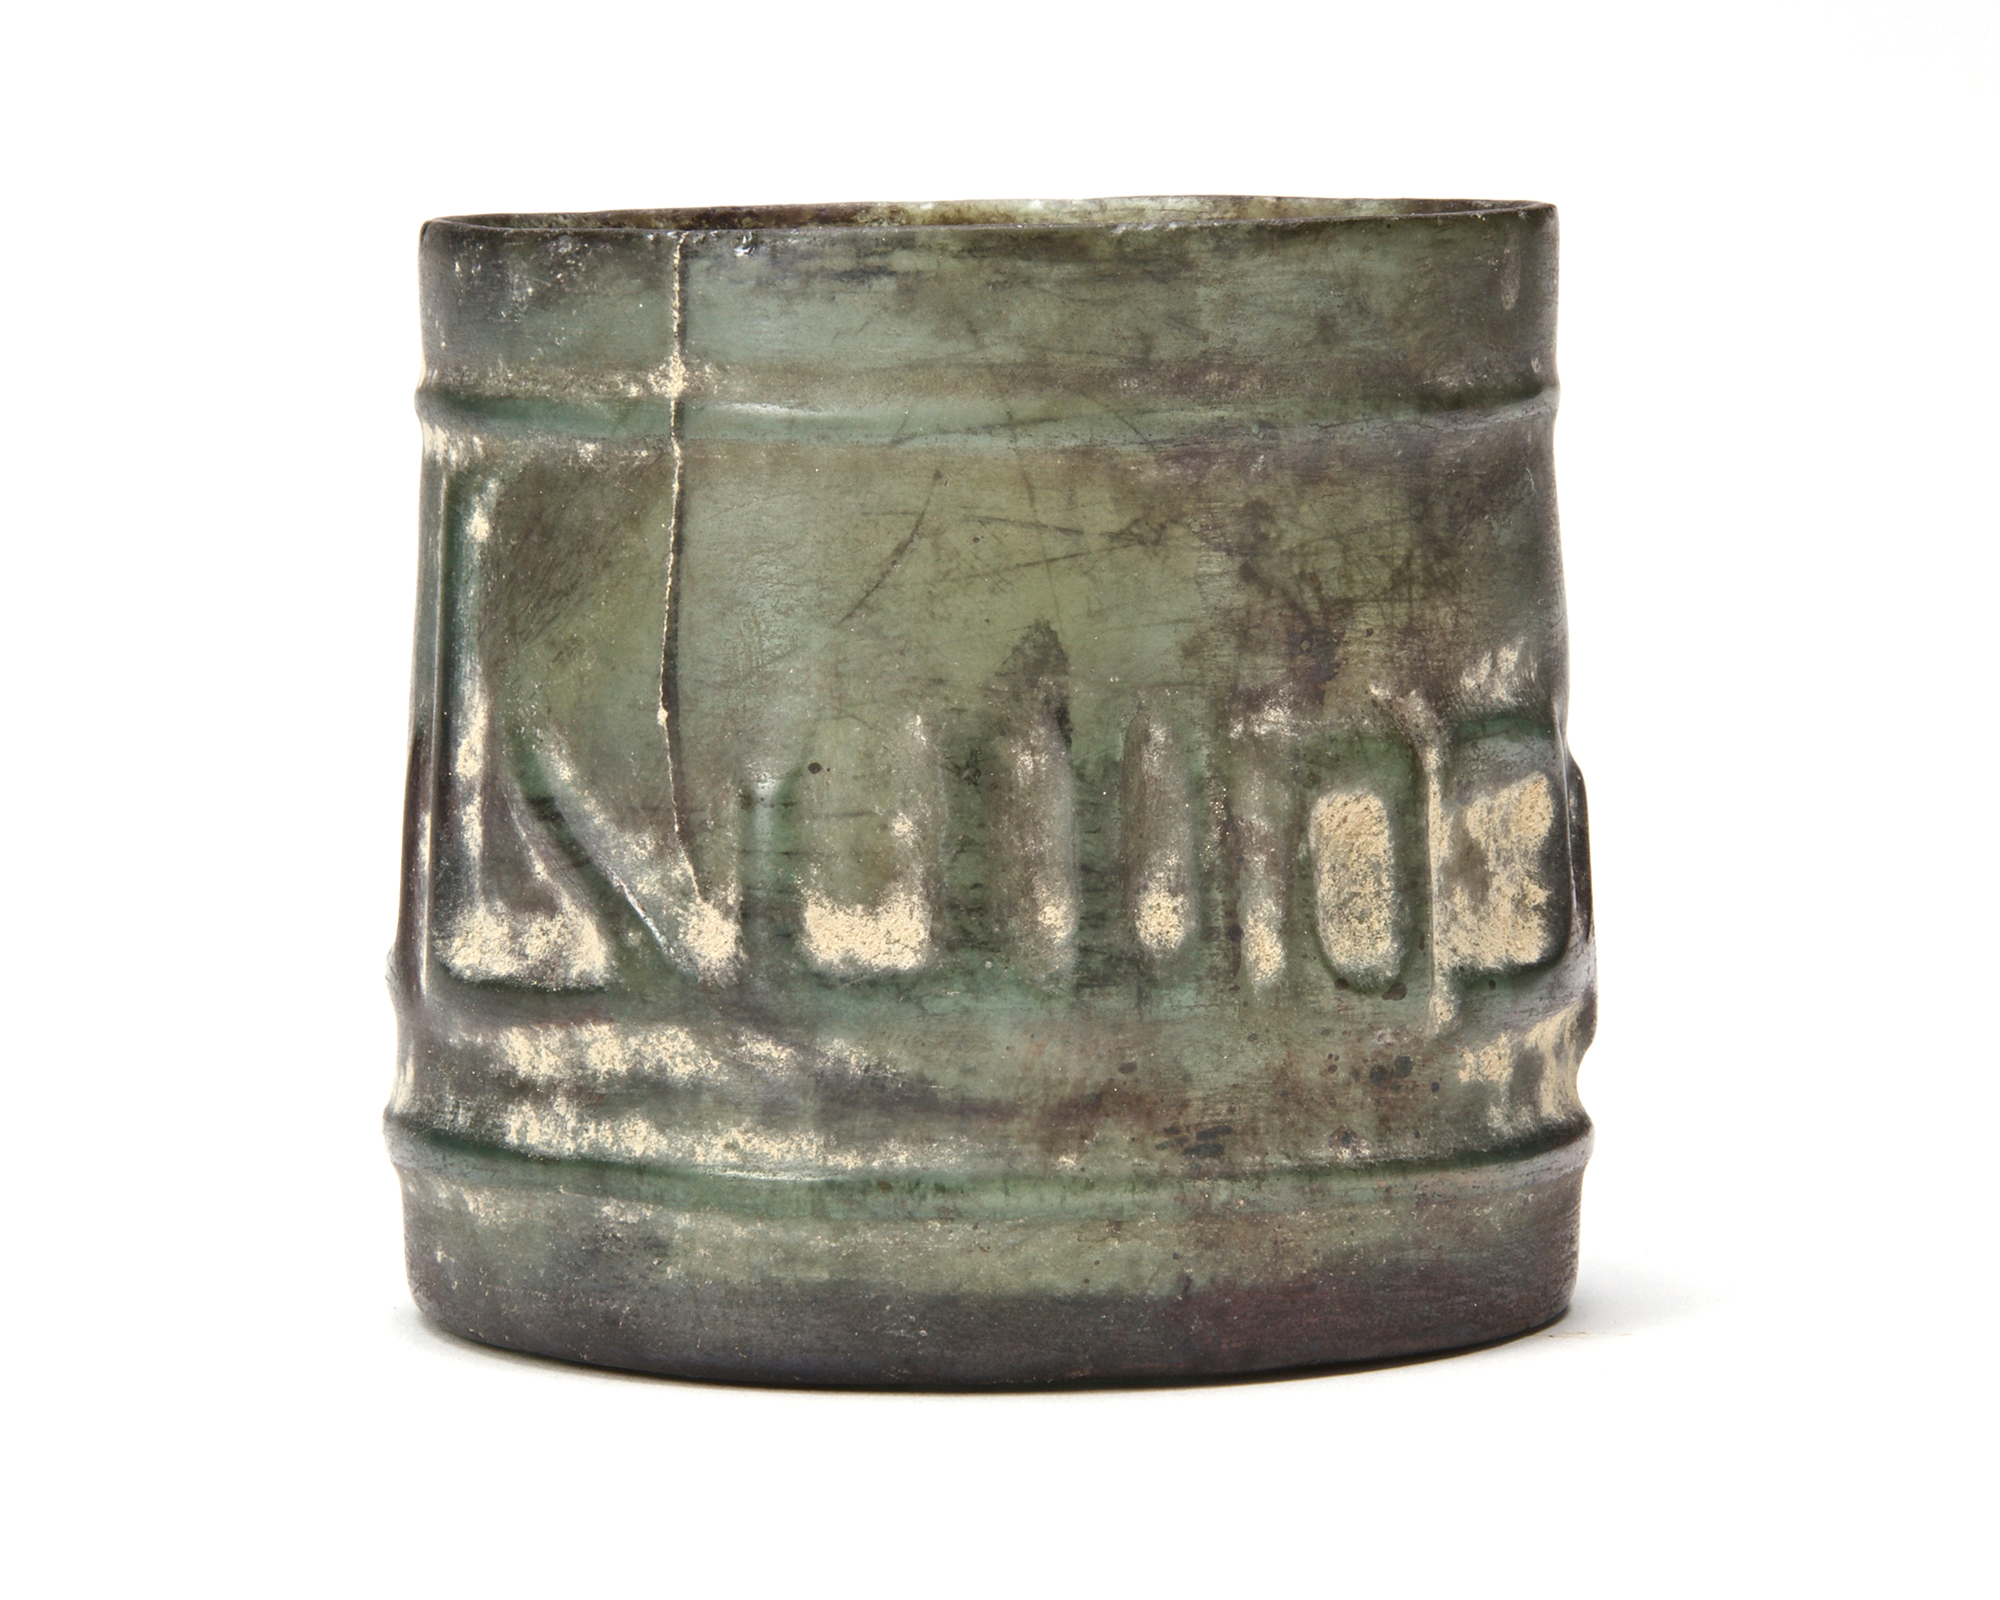 A GLASS BEAKER, SYRIA, 10TH-11TH CENTURY - Image 9 of 14